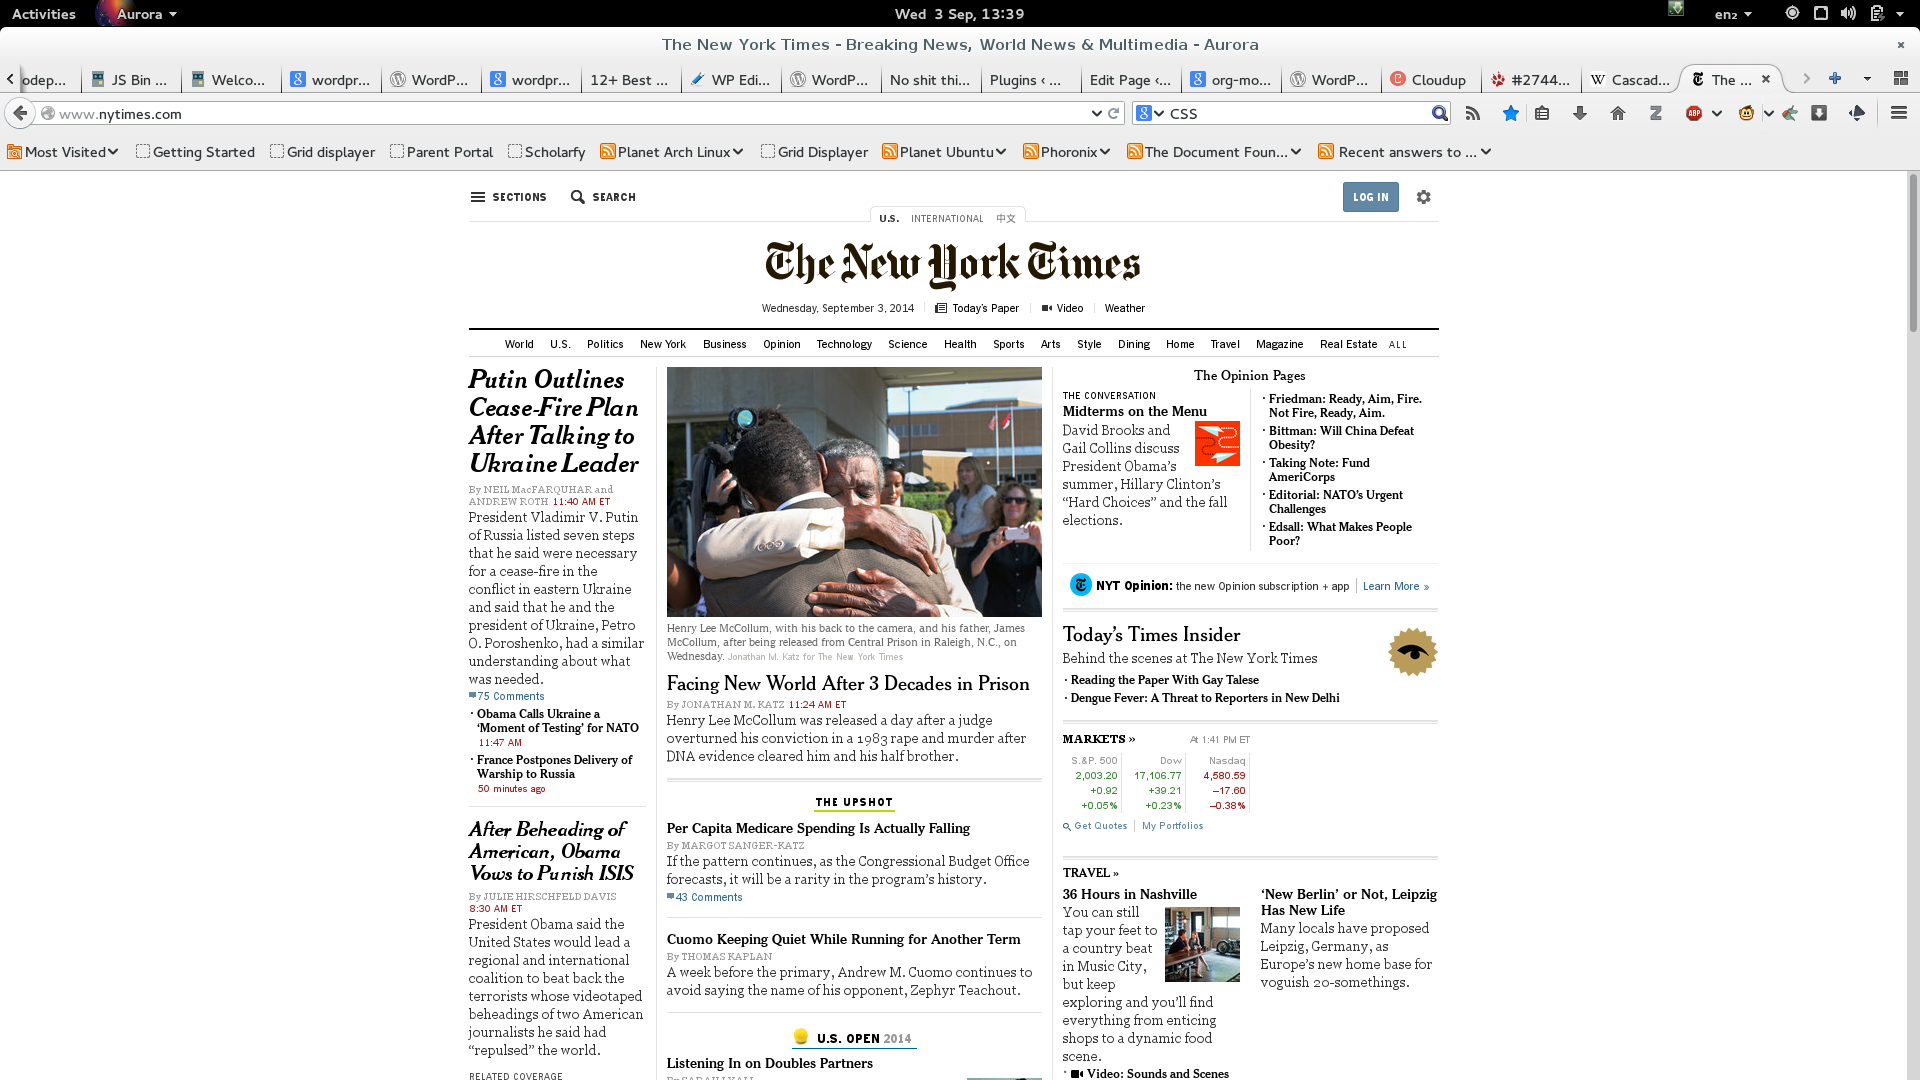 nytimes-w-css.png